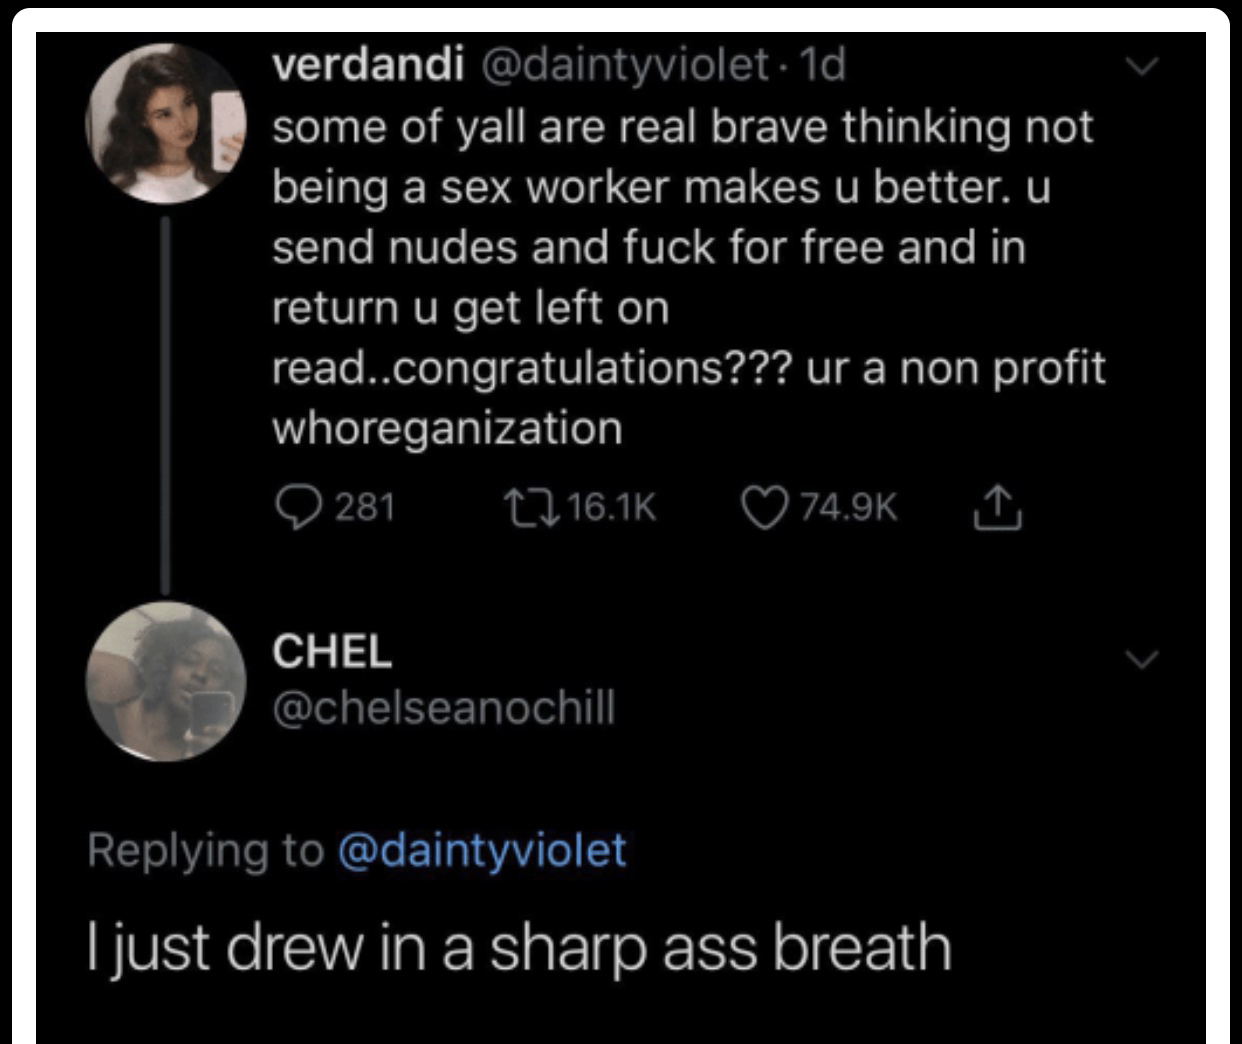 atmosphere - verdandi . 1d some of yall are real brave thinking not being a sex worker makes u better. u send nudes and fuck for free and in return u get left on read..congratulations??? ur a non profit whoreganization 2281 I Chel I just drew in a sharp a